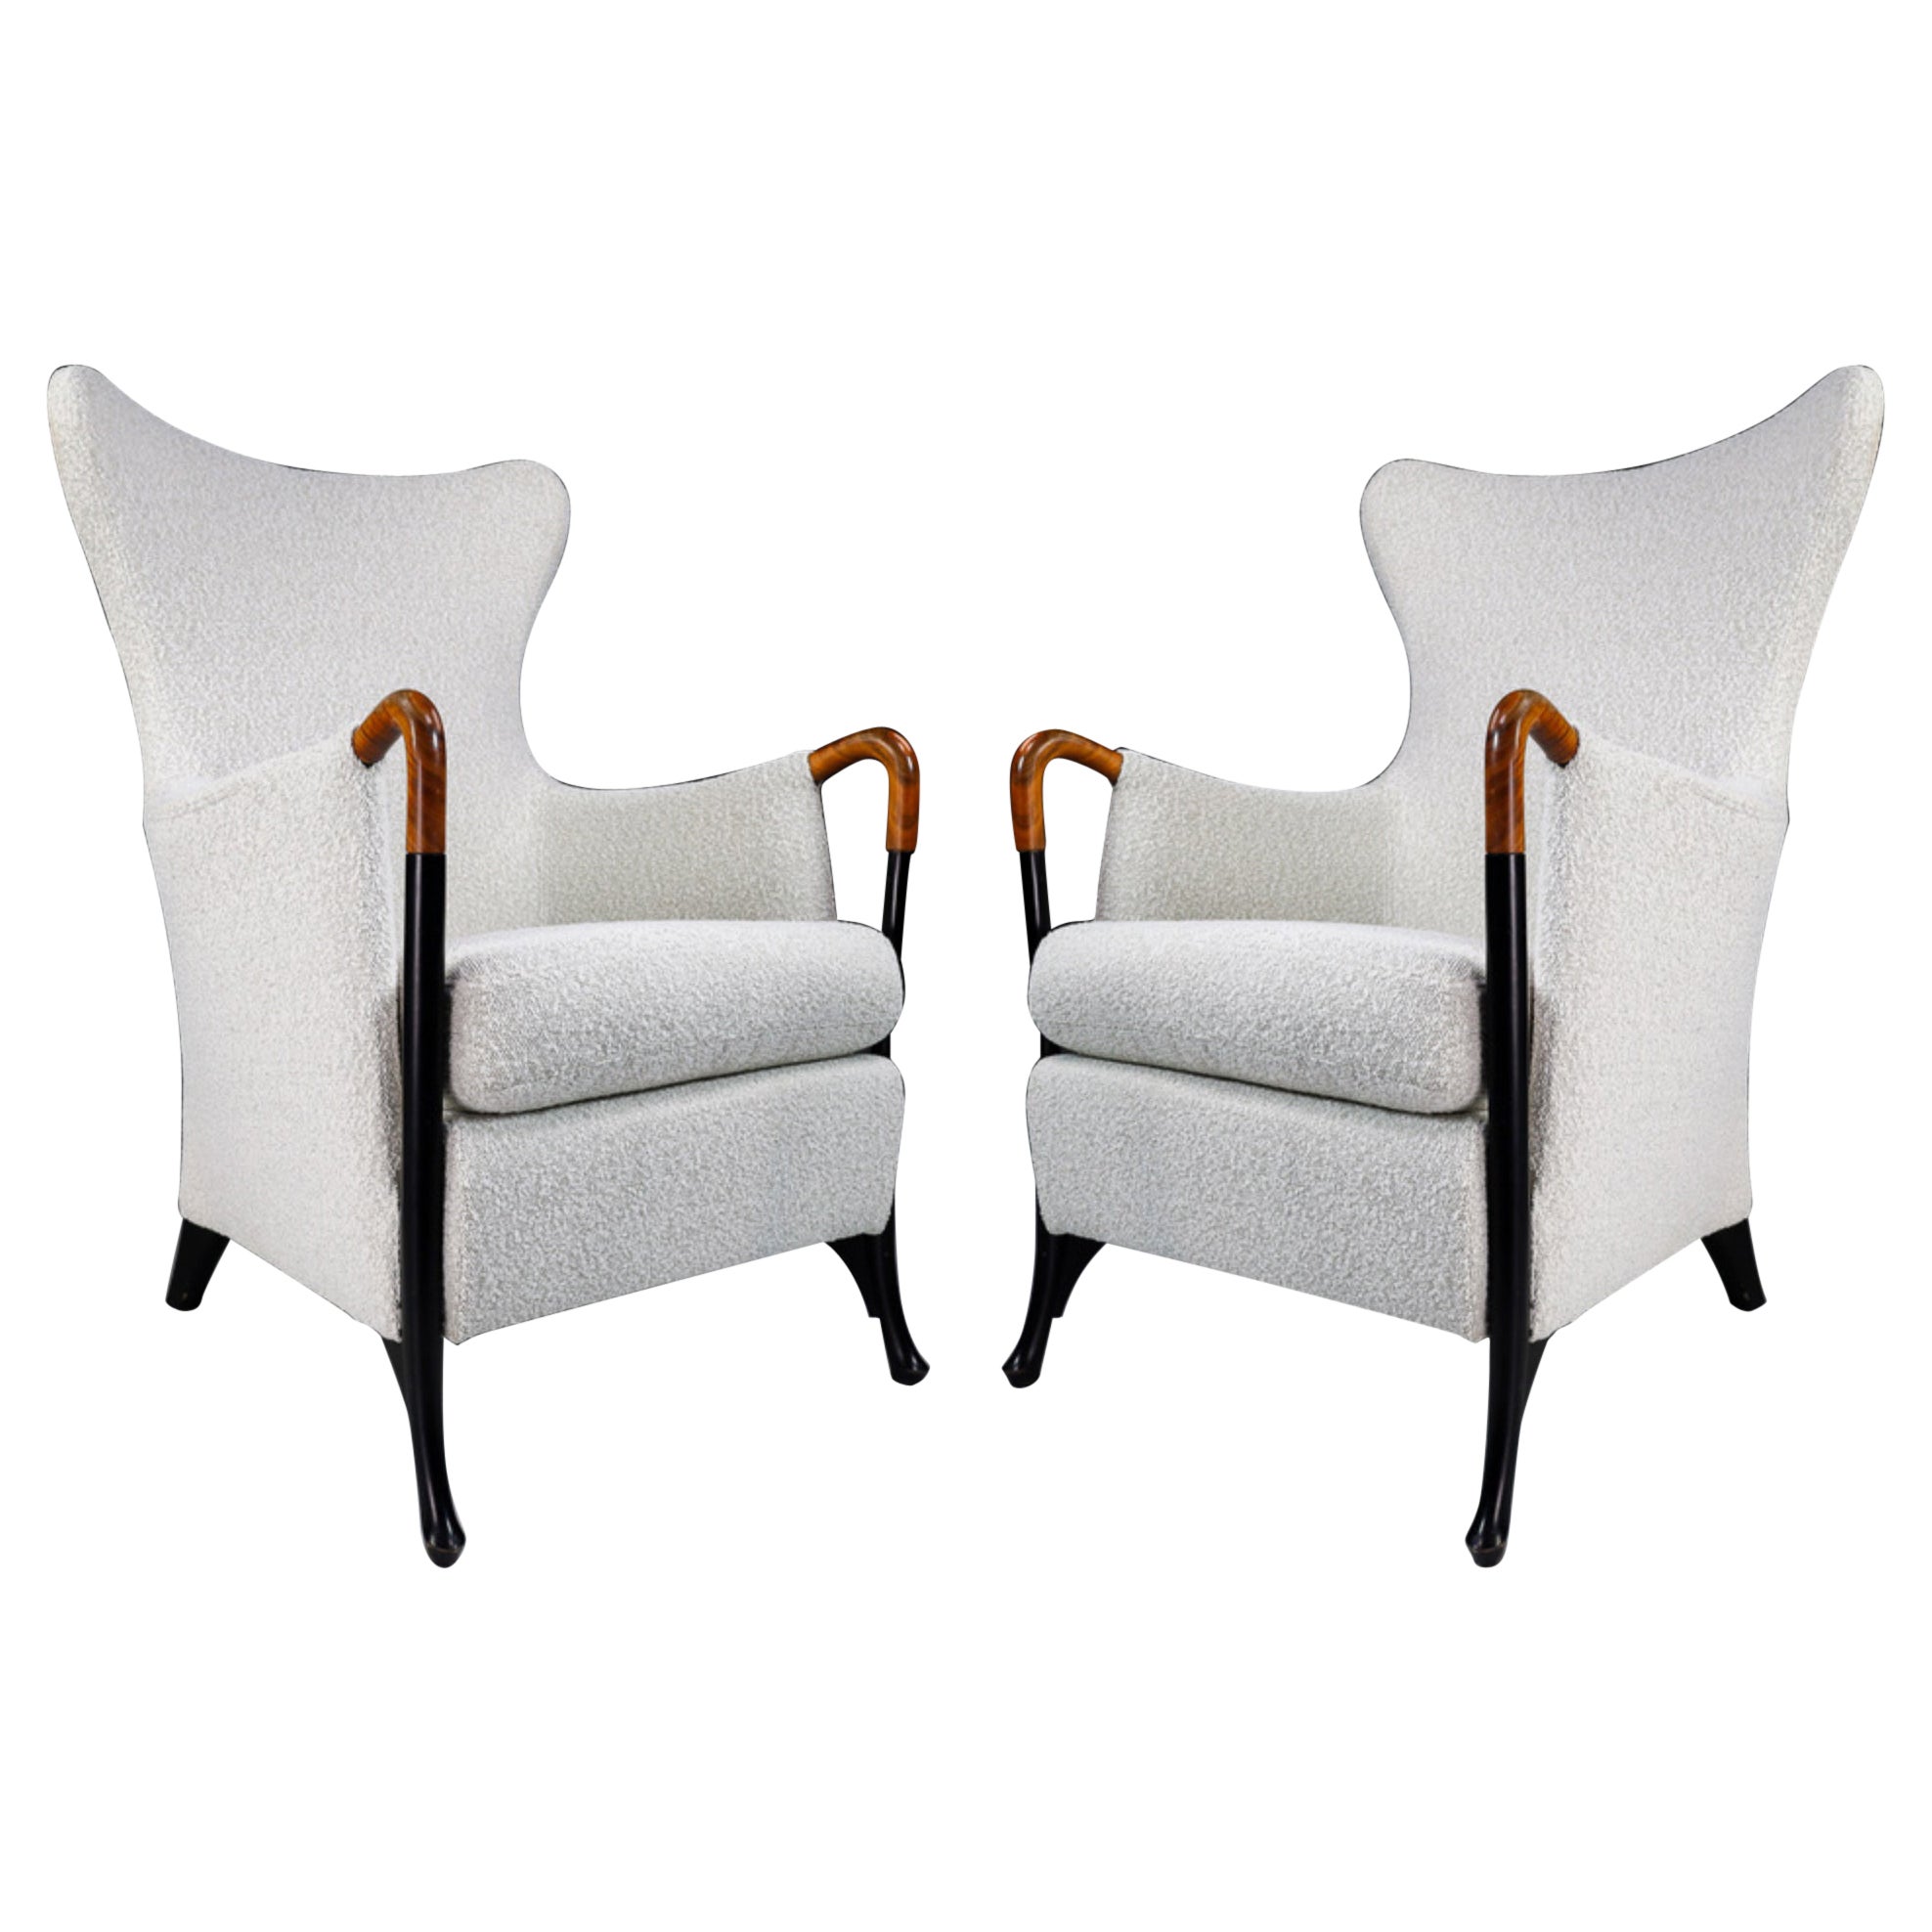 Wingback Chairs by Umberto Asnago for Giorgetti / Progetti in Bouclé Wool Fabric